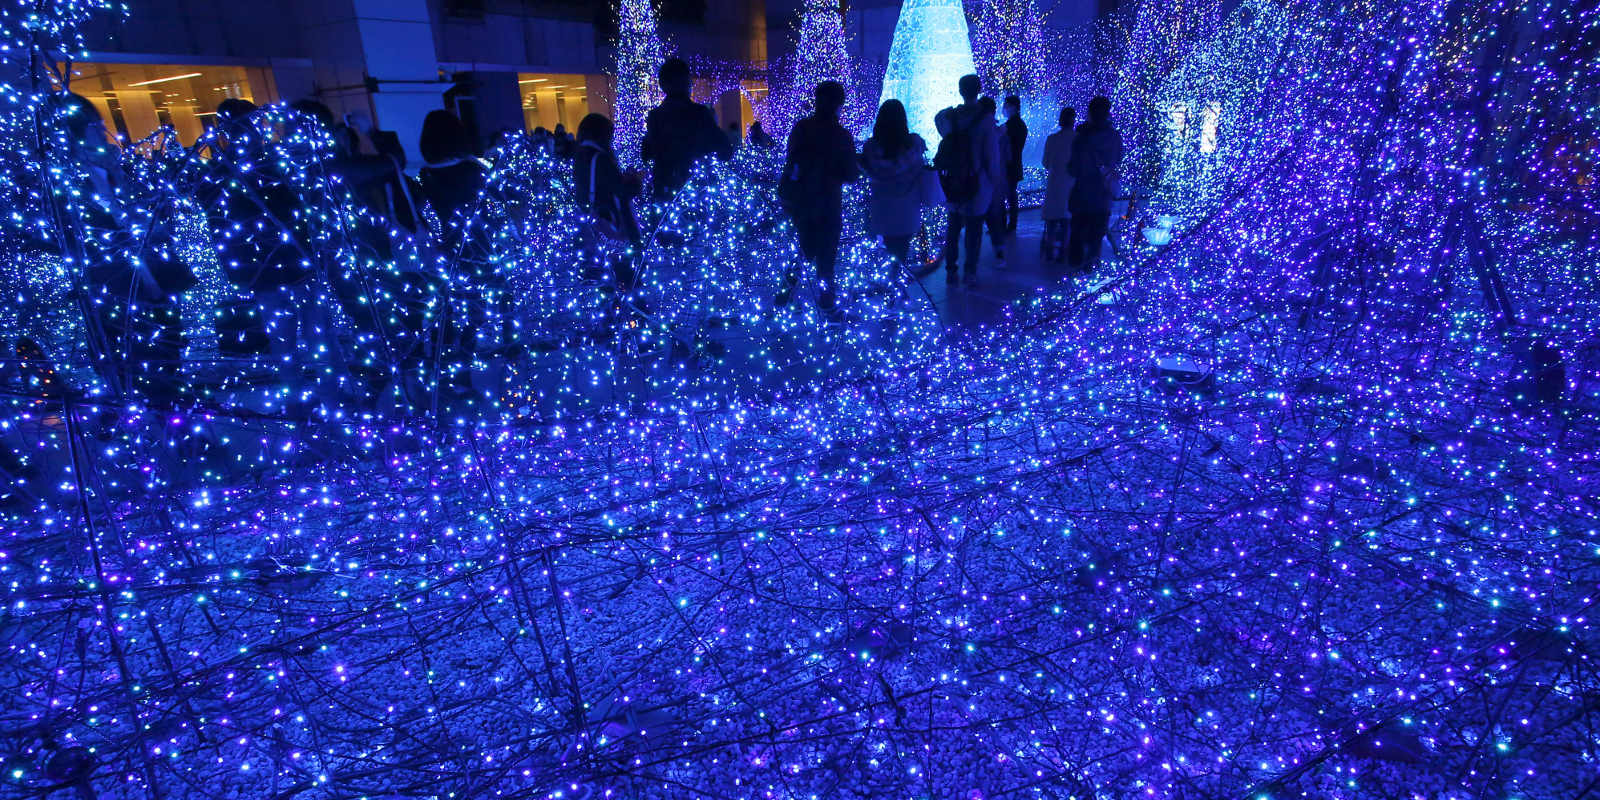 This Light Show In Tokyo Is Bewilderingly Pretty